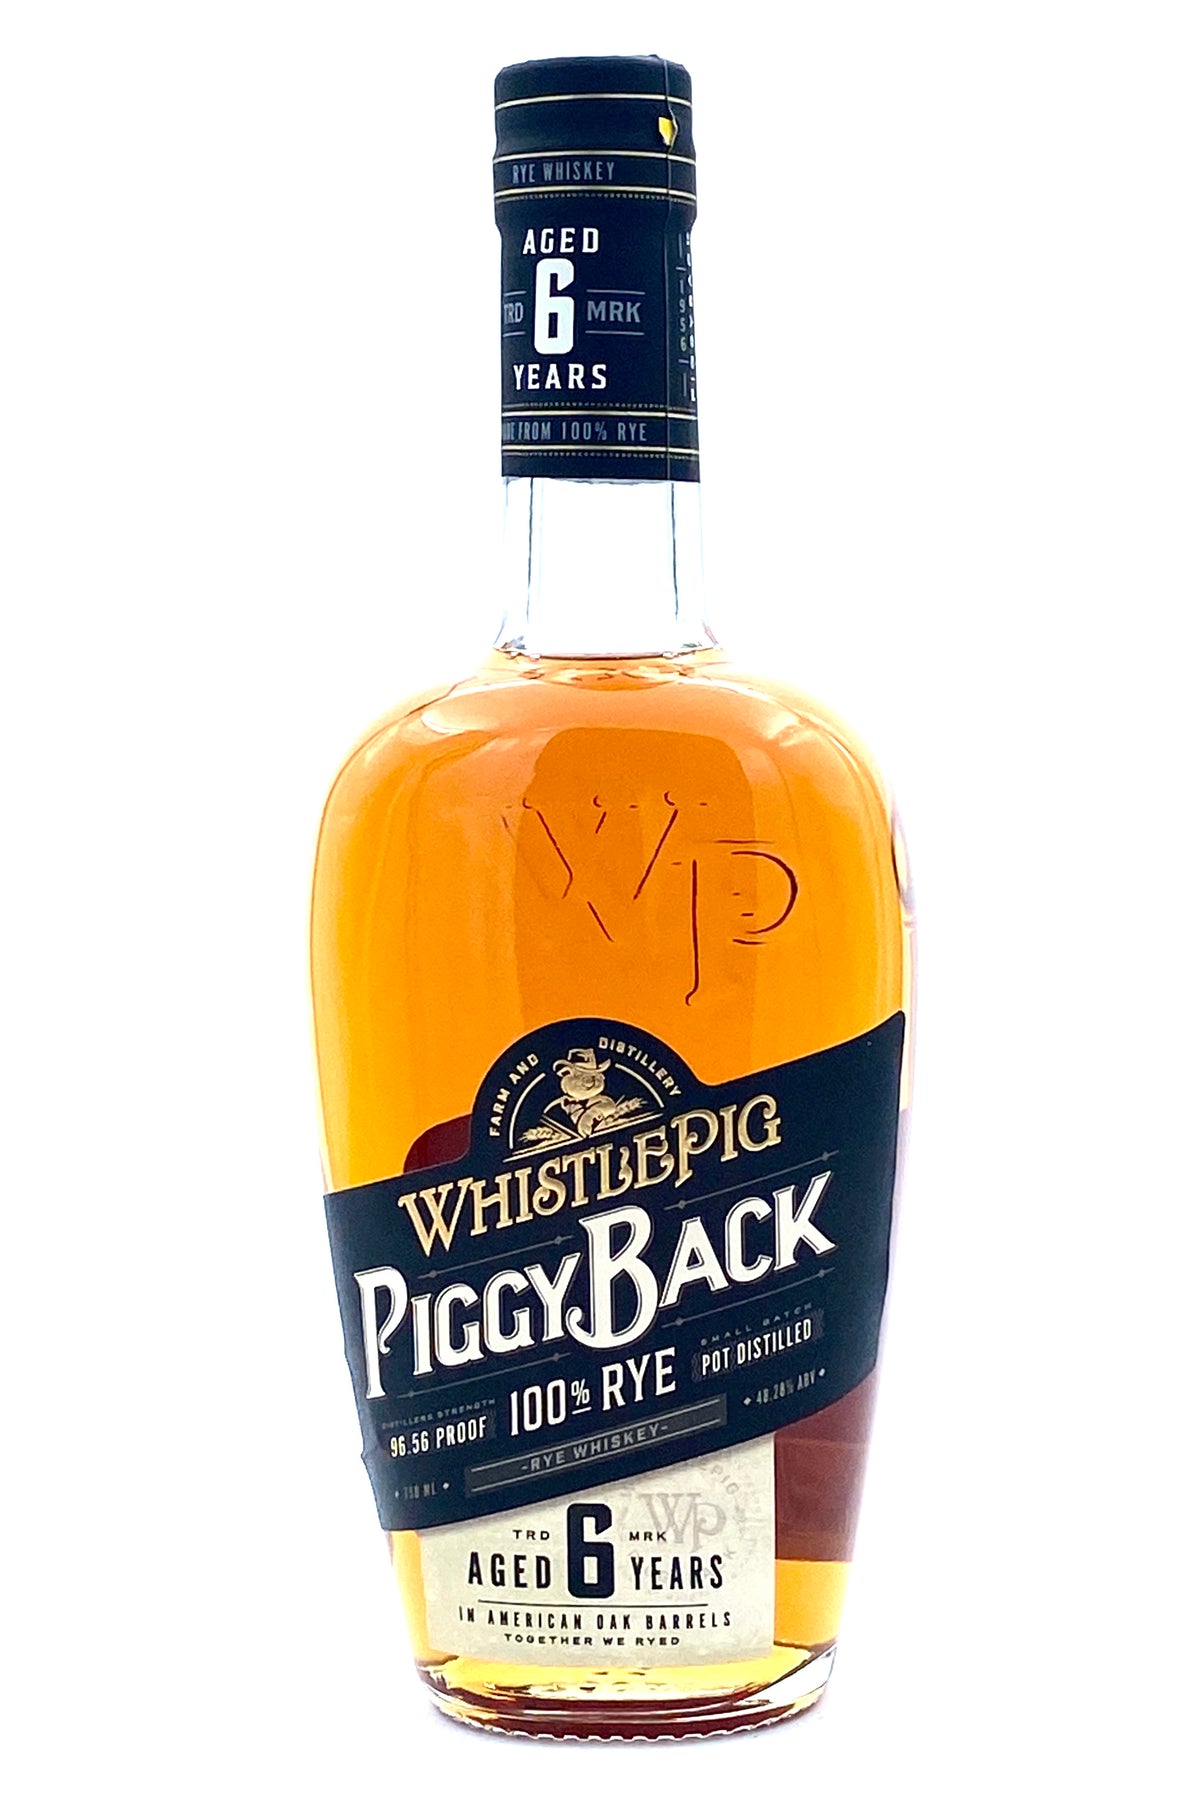 WhistlePig Piggyback 6 Years Old 100% Rye Whiskey with Pour Spout!